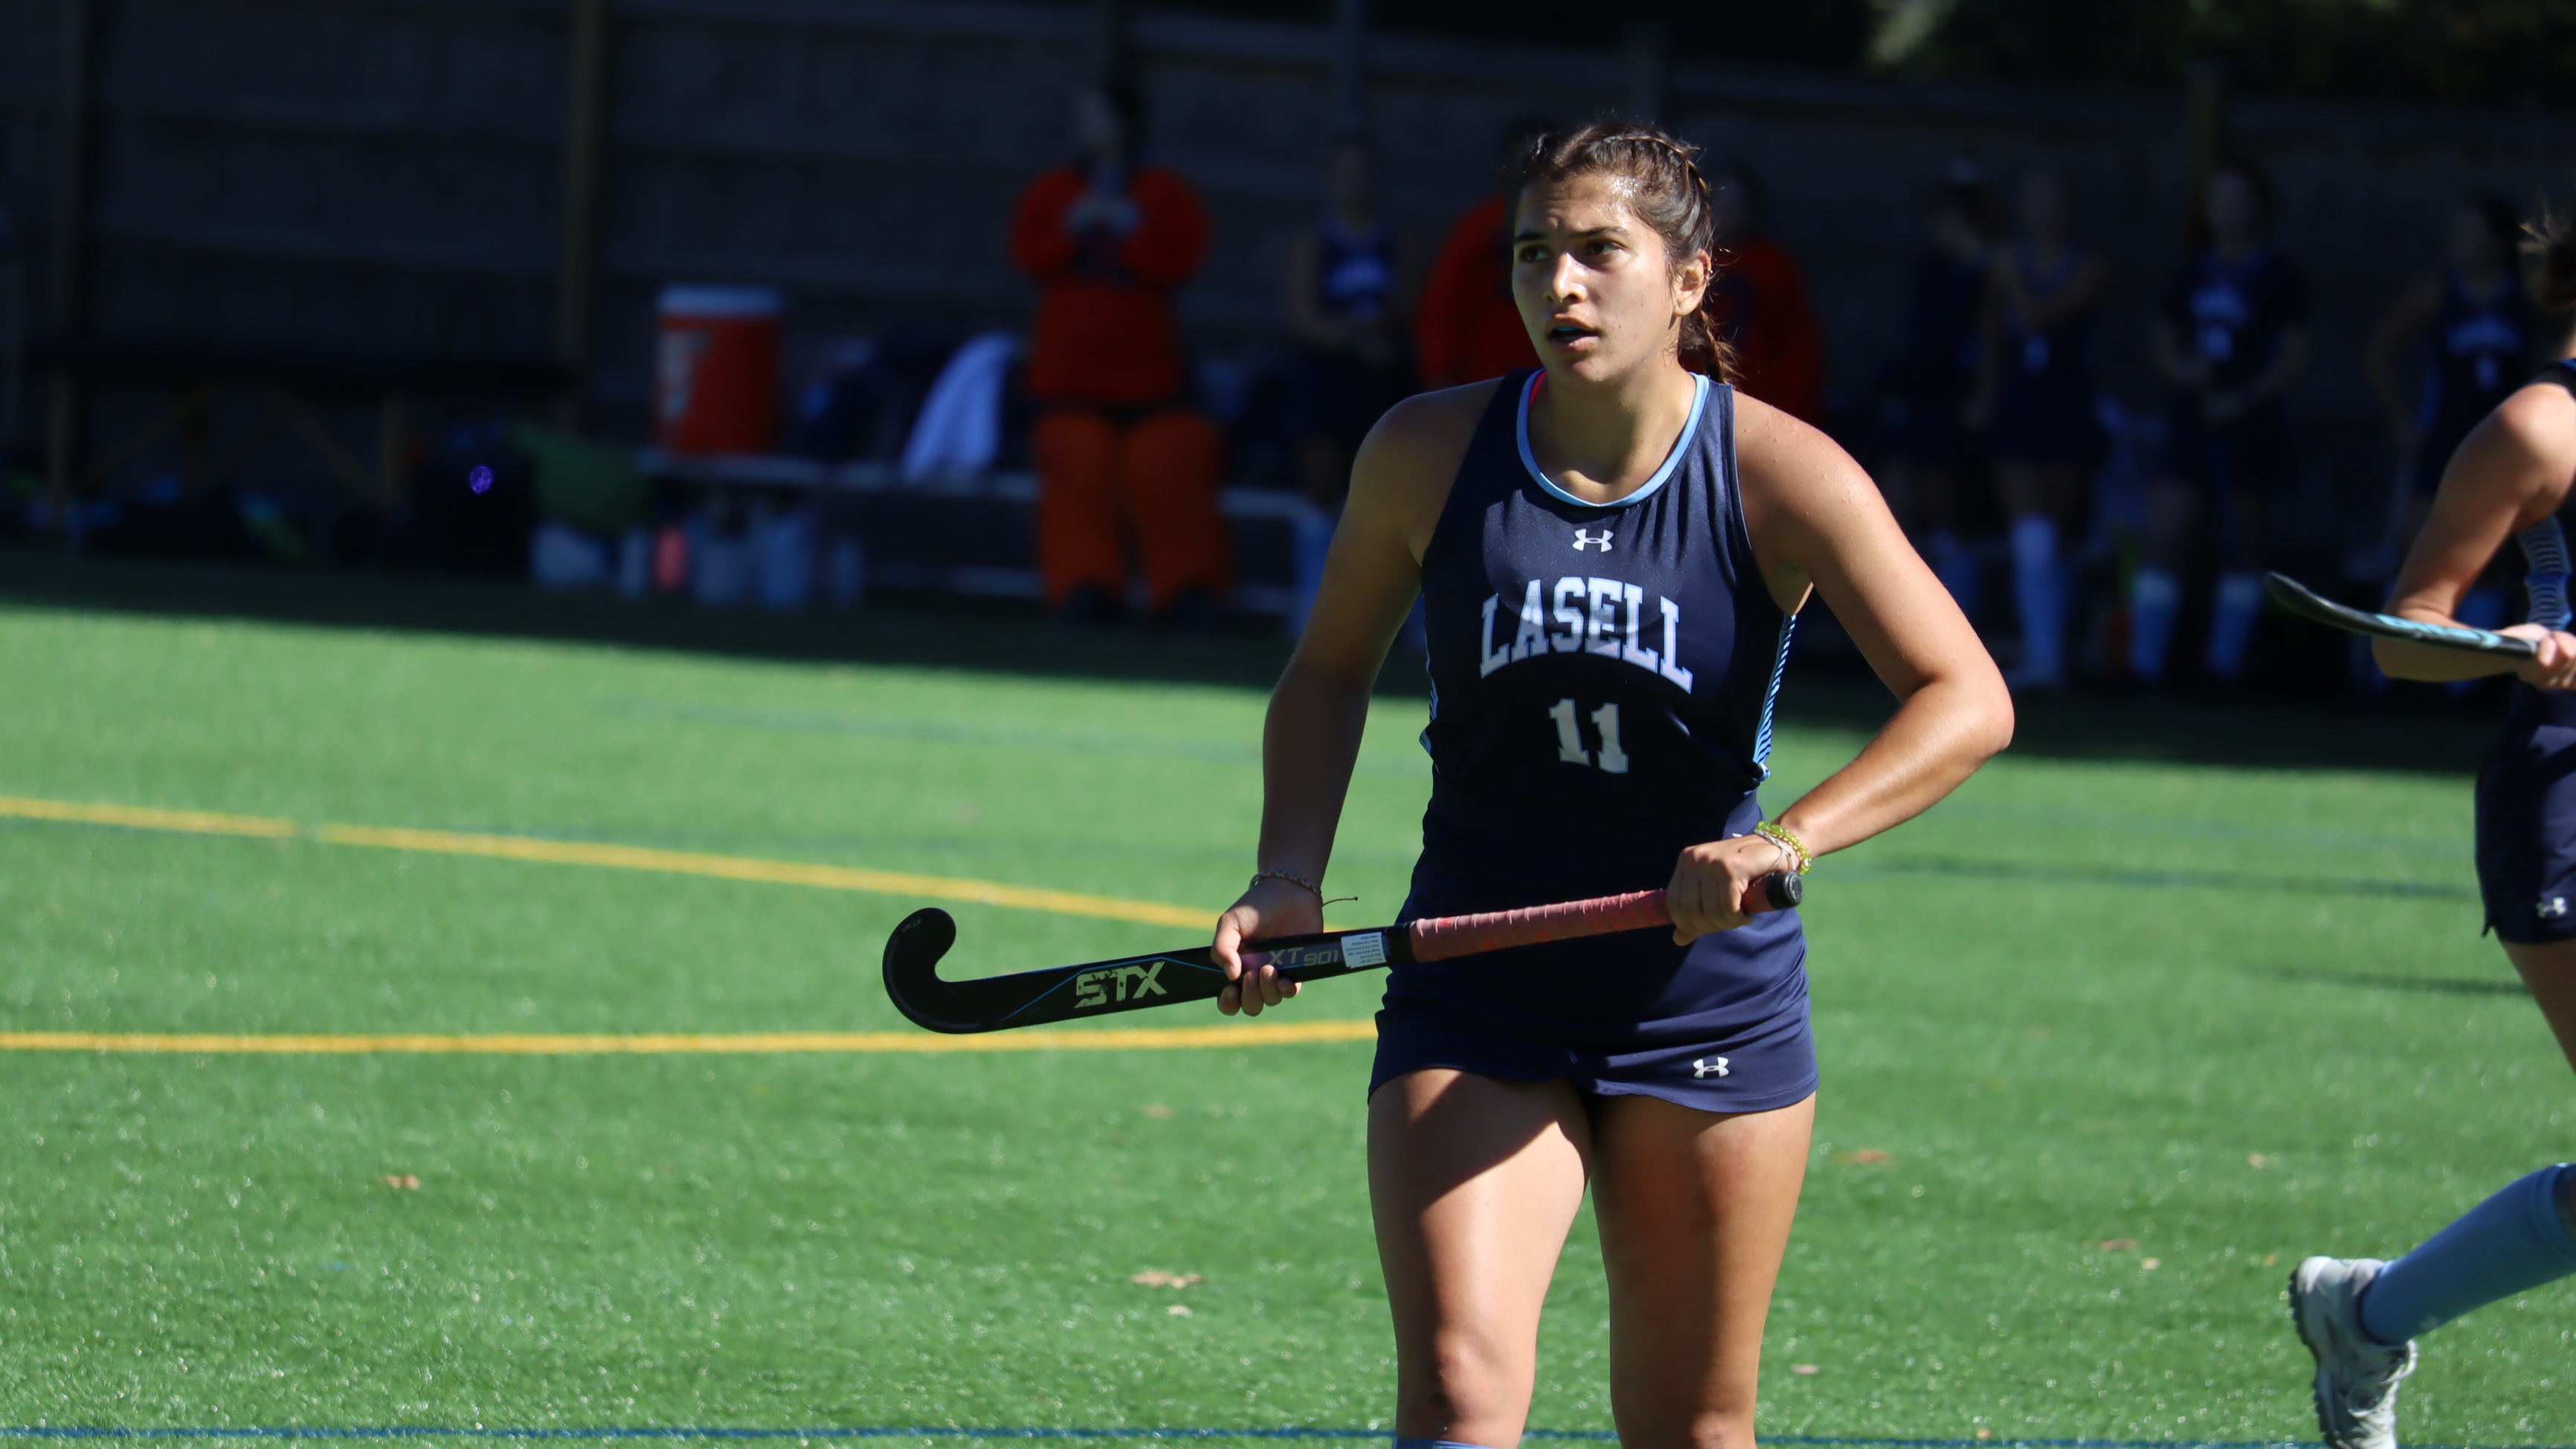 FH: Lasers defeat Amcats